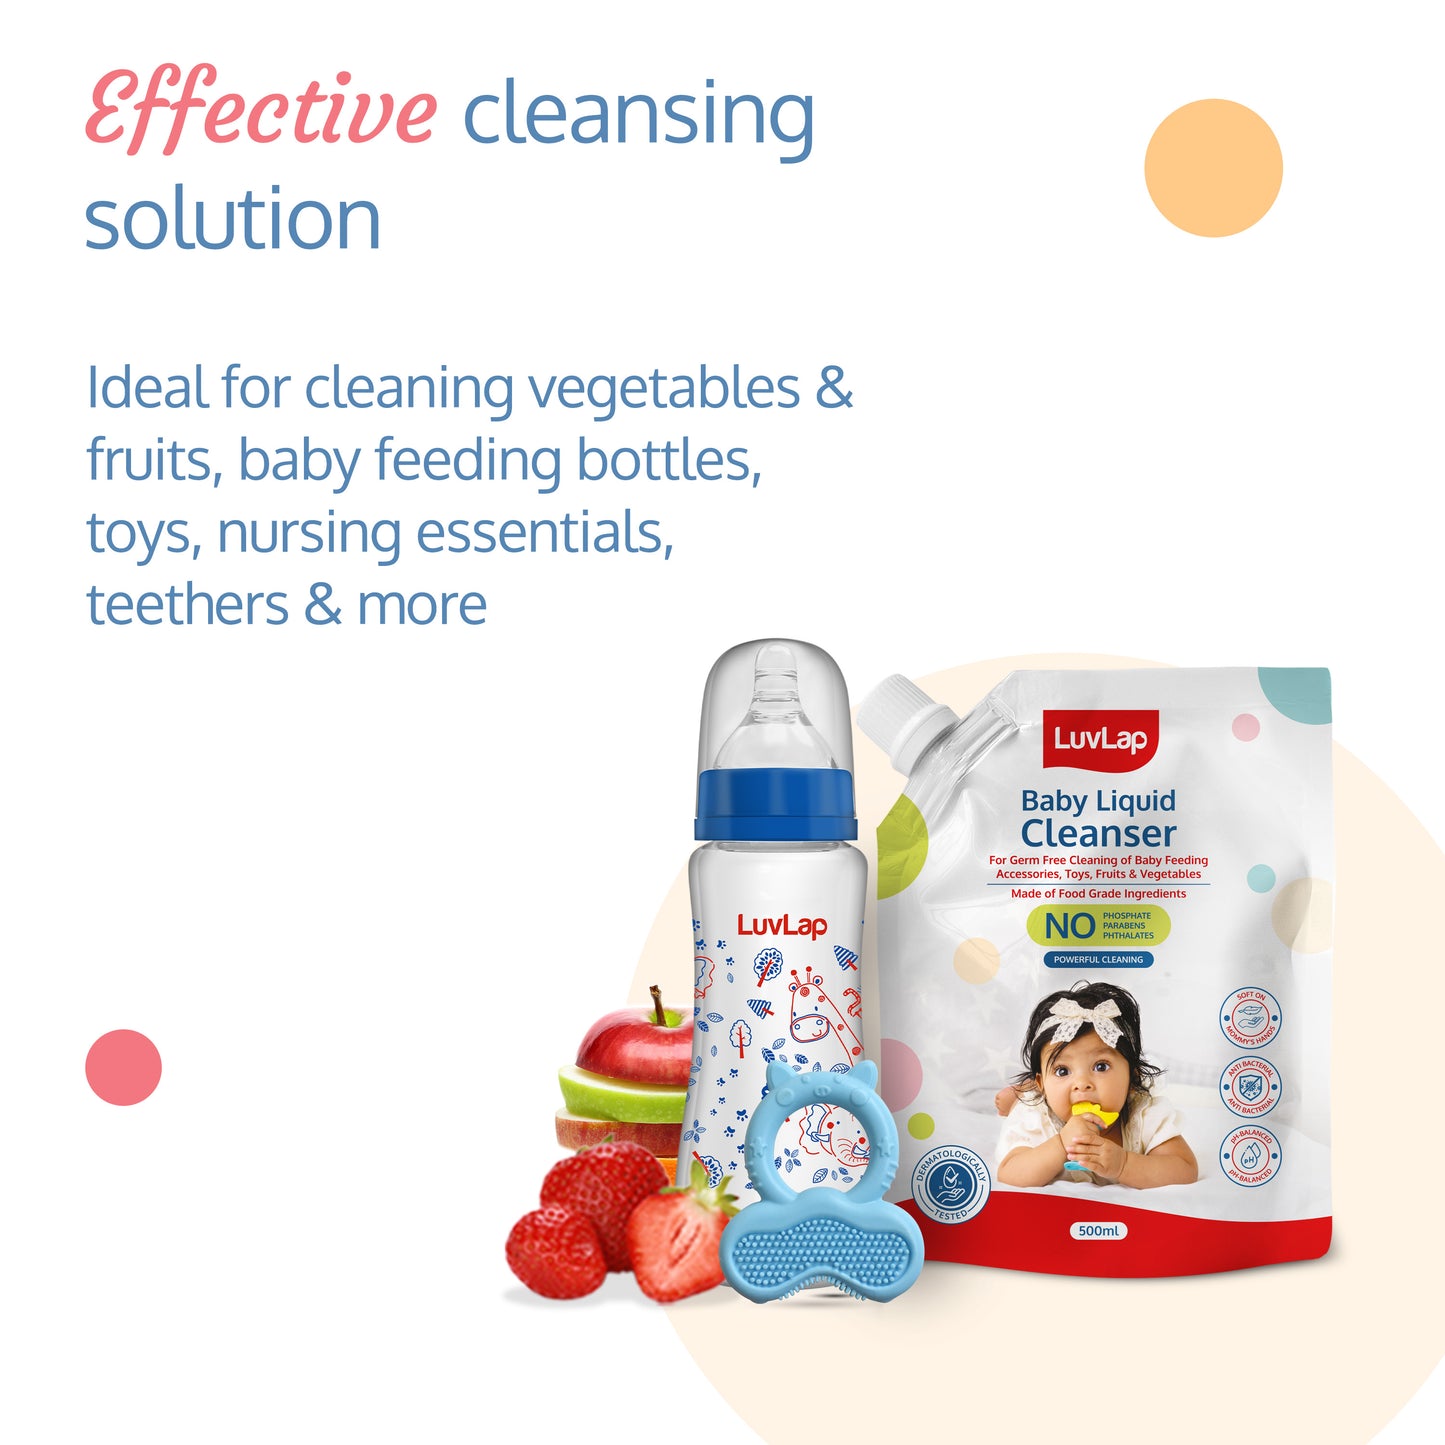 Baby Liquid Cleanser Refill pack- 500ml, For cleaning feeding bottle, cutlery, toys, fruits & vegetables, Kills 99.9% Germs, pH Balanced Dermatologically tested formula, No harsh chemicals